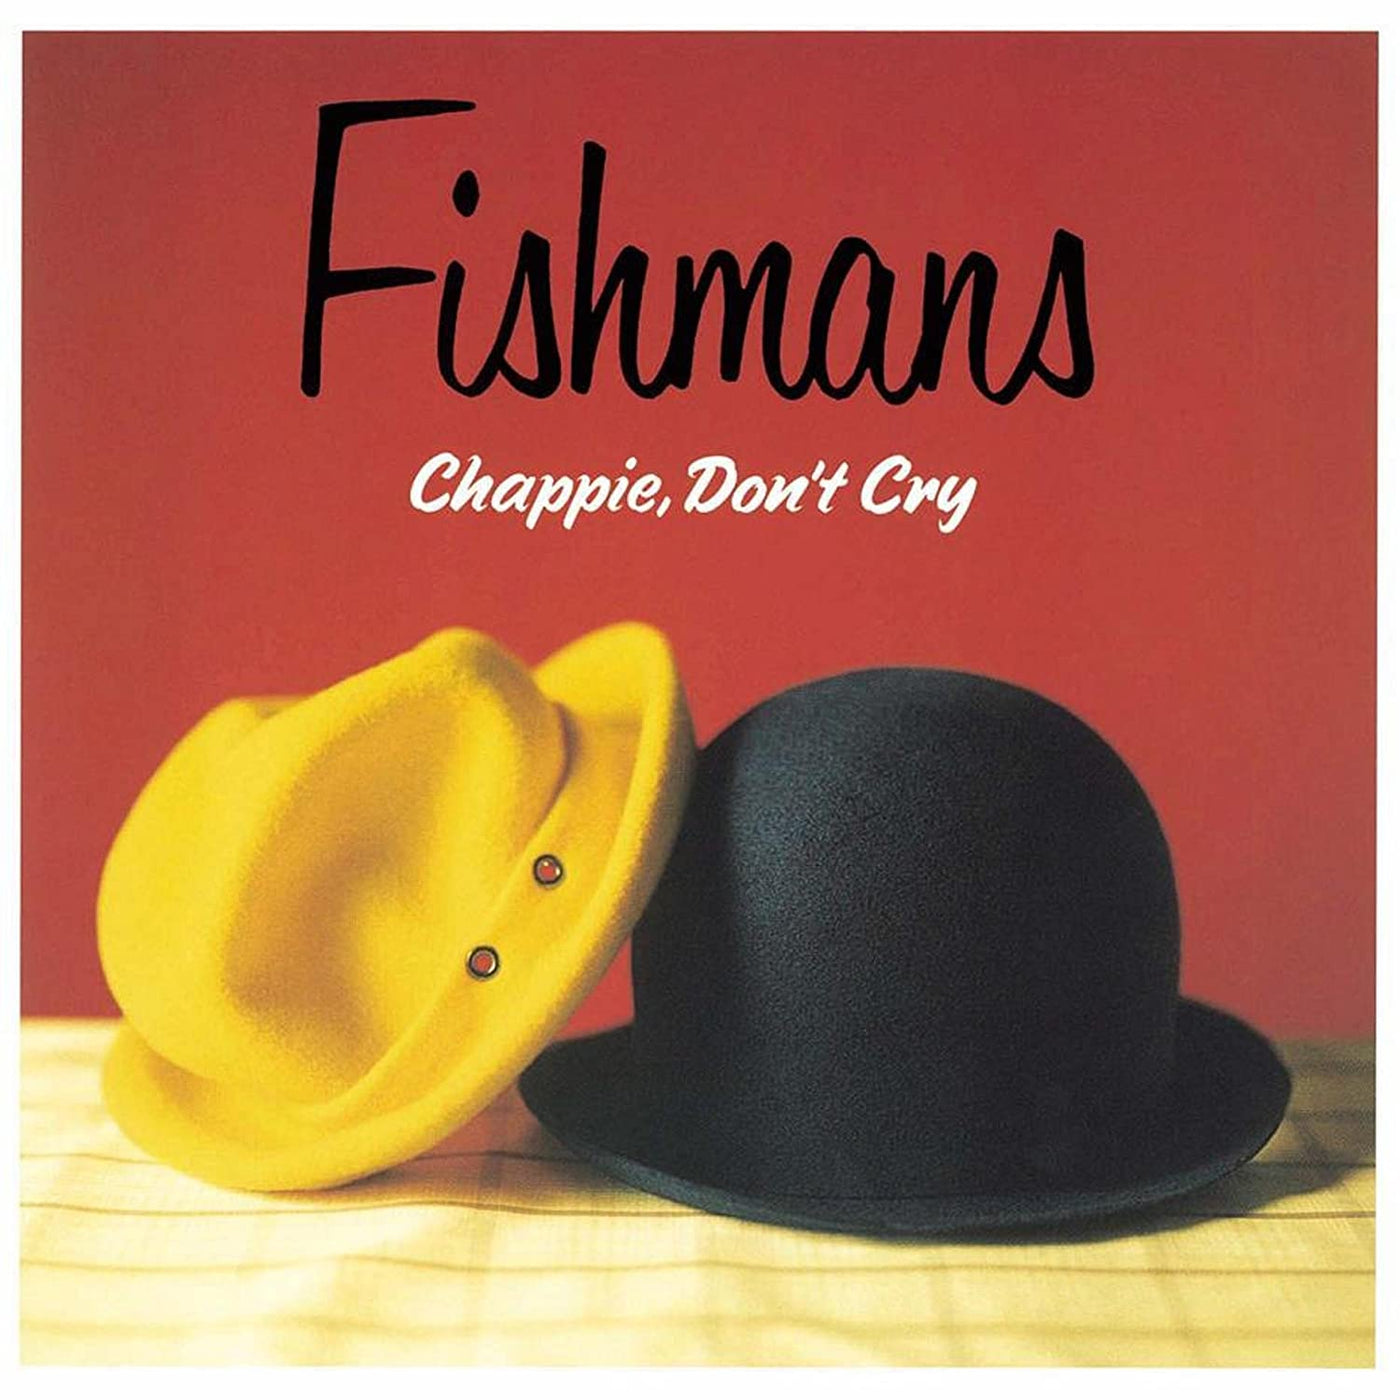 Fishmans - Chappie Dont Cry